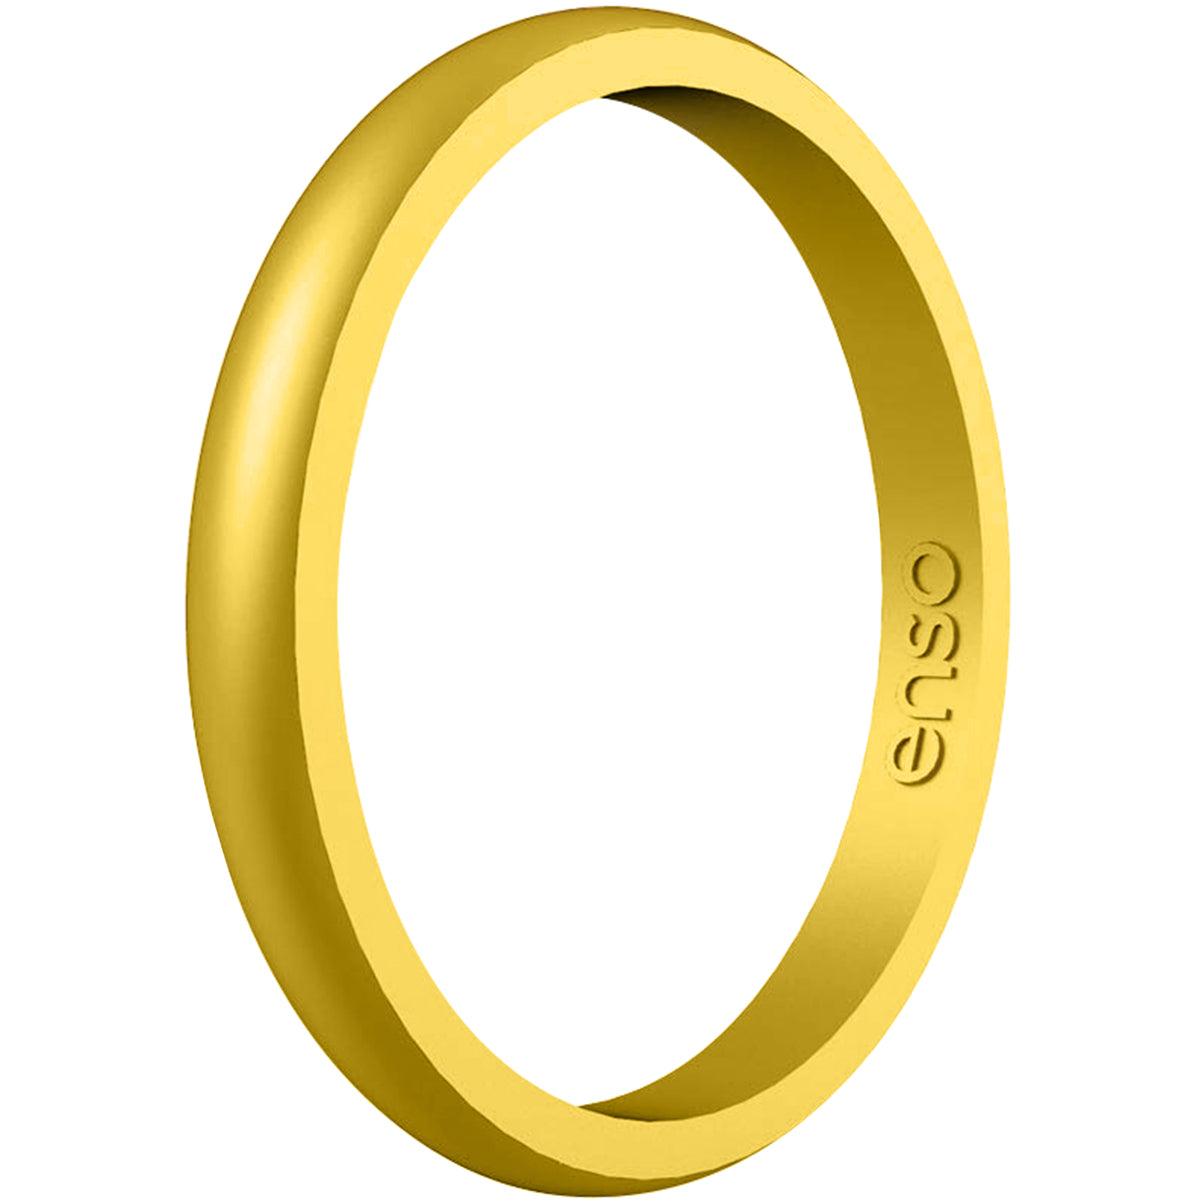 Enso Rings Halo Elements Series Silicone Ring - Gold Enso Rings